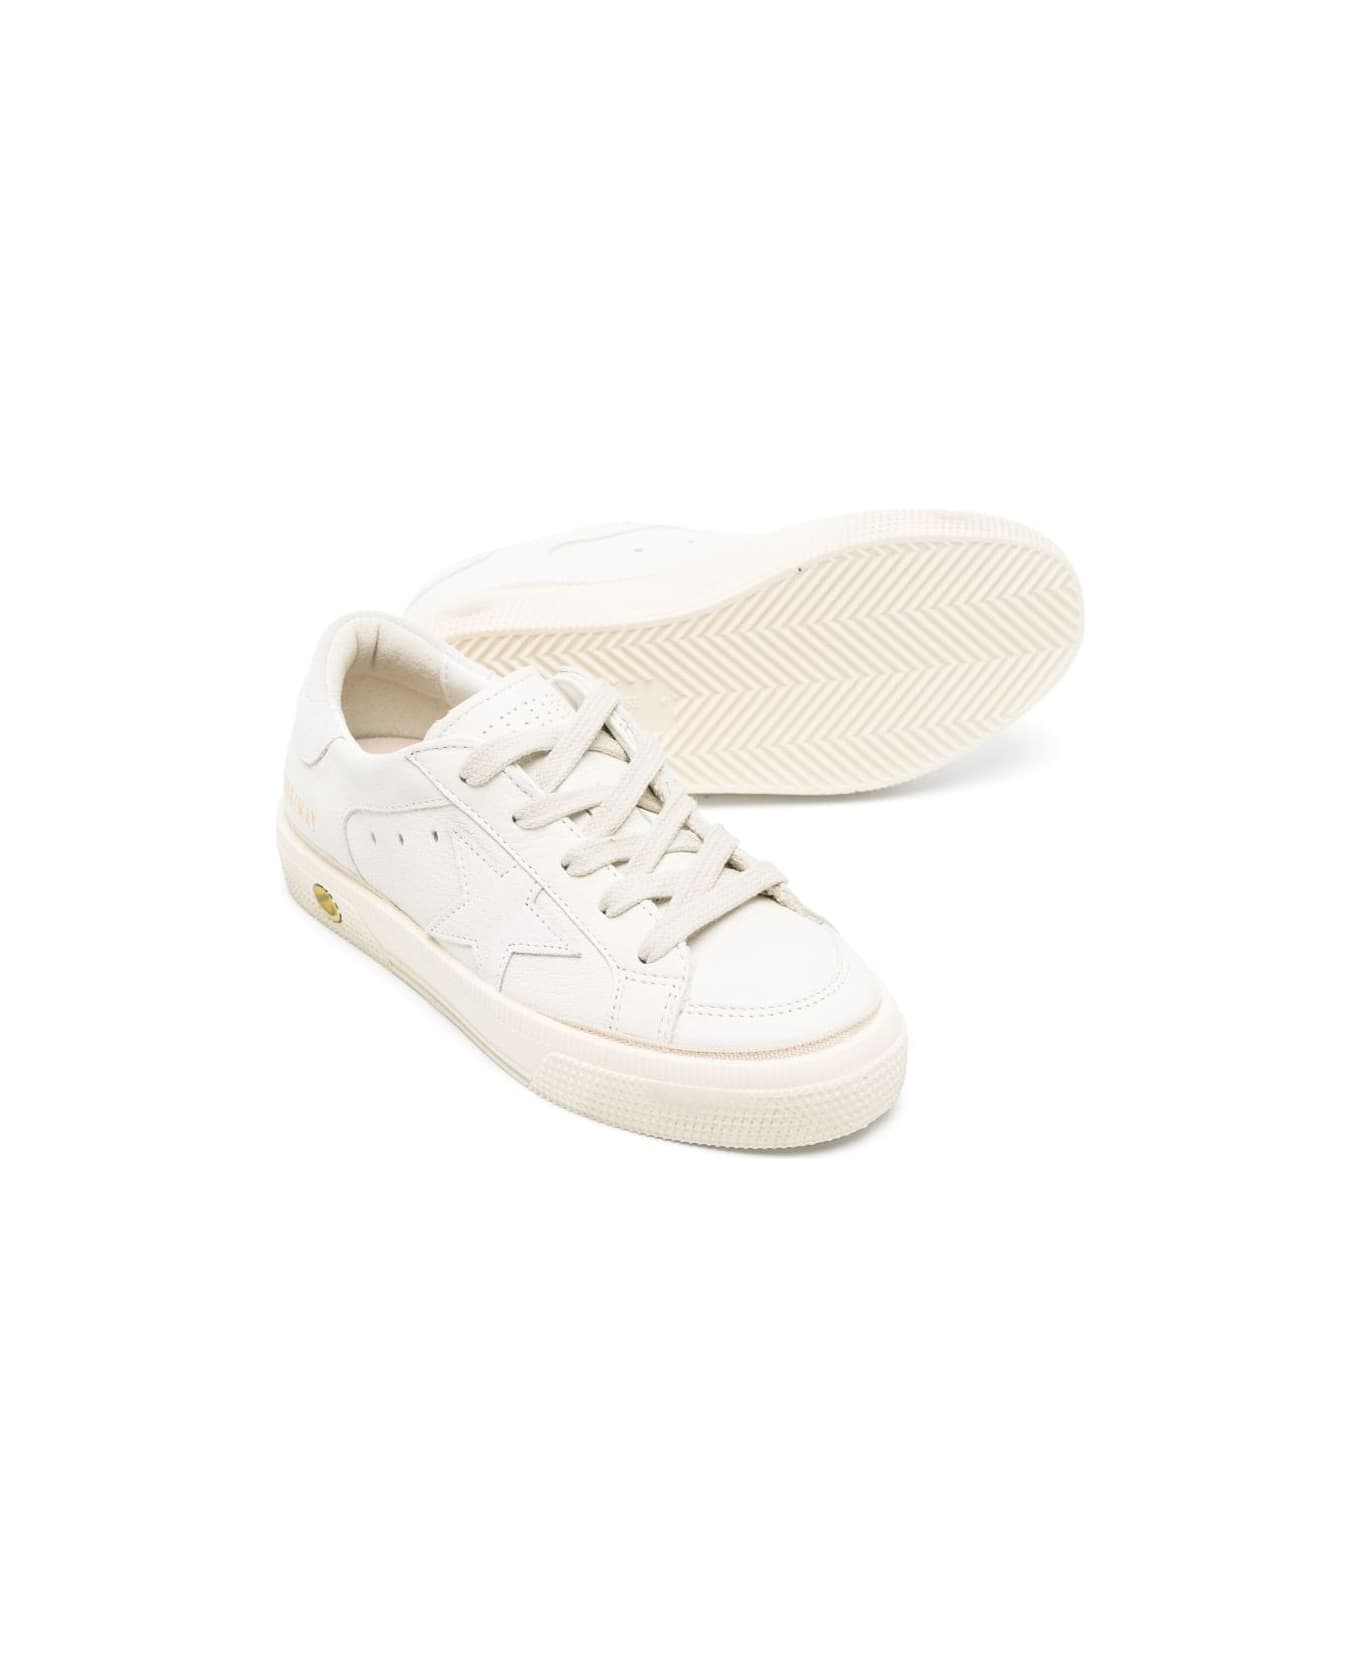 Golden Goose May Nappa Upper Suede Star And Heel - Optic White シューズ